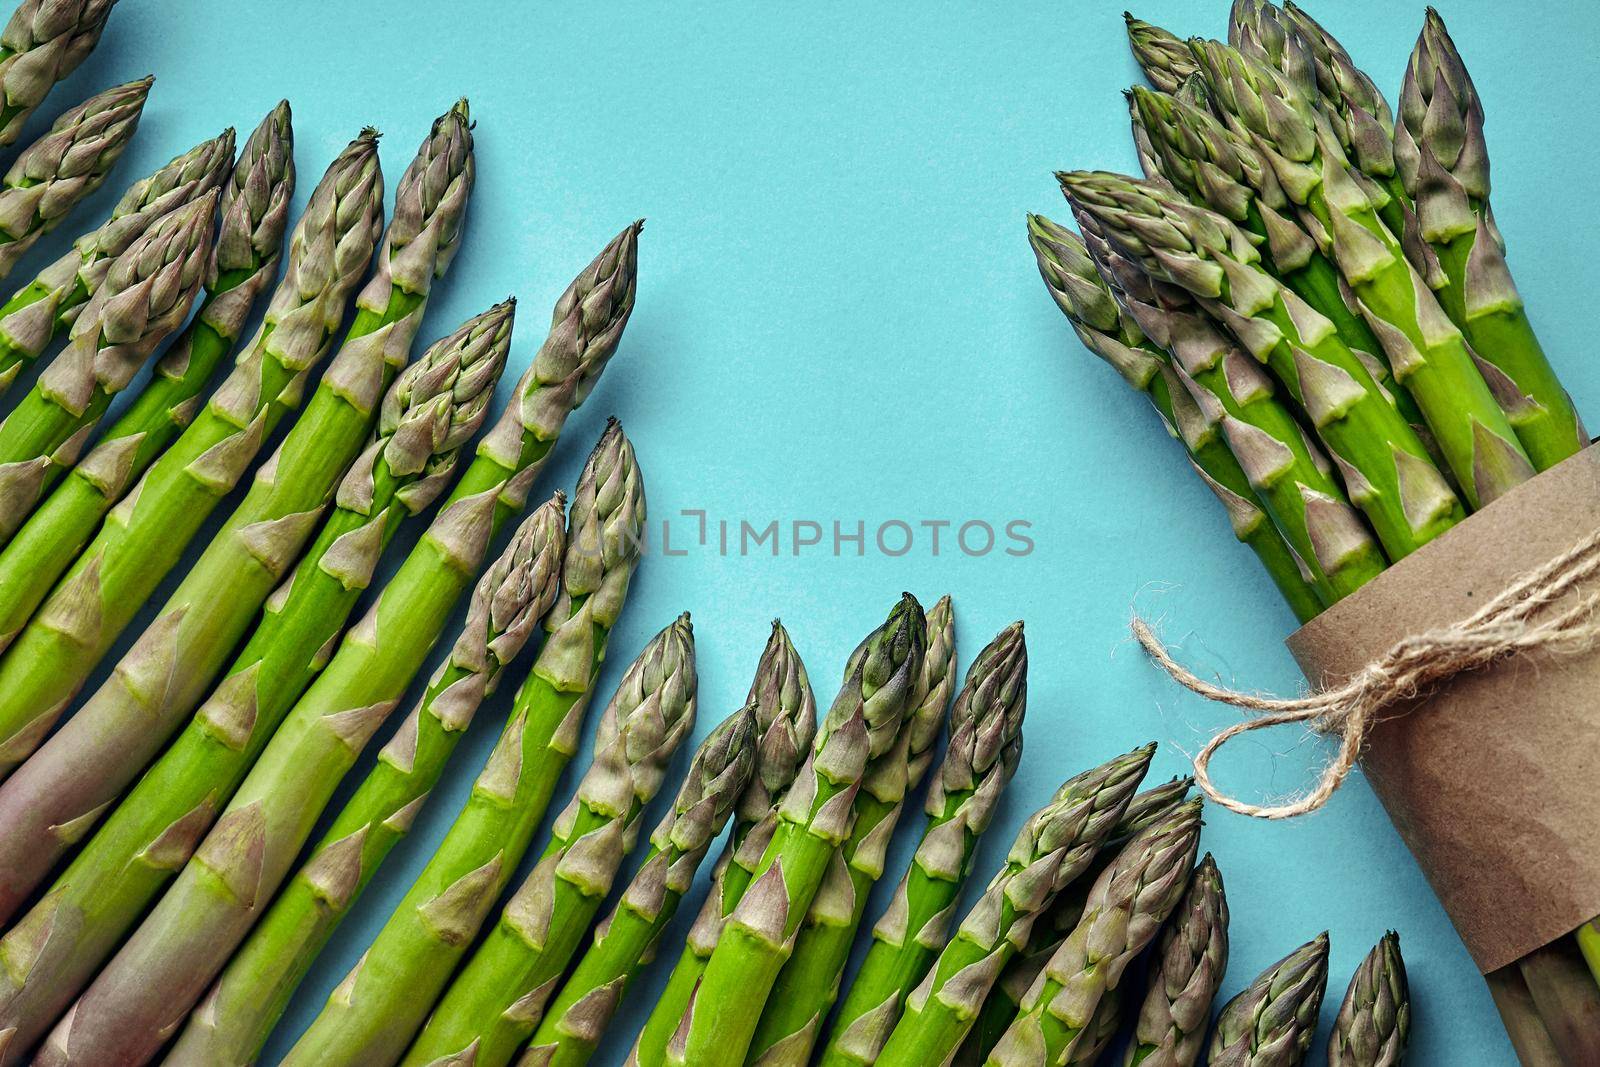 Bunch of an edible, raw stems of asparagus on blue background. Fresh, green vegetables, top view. Healthy eating. Spring harvest, agricultural farming concept.